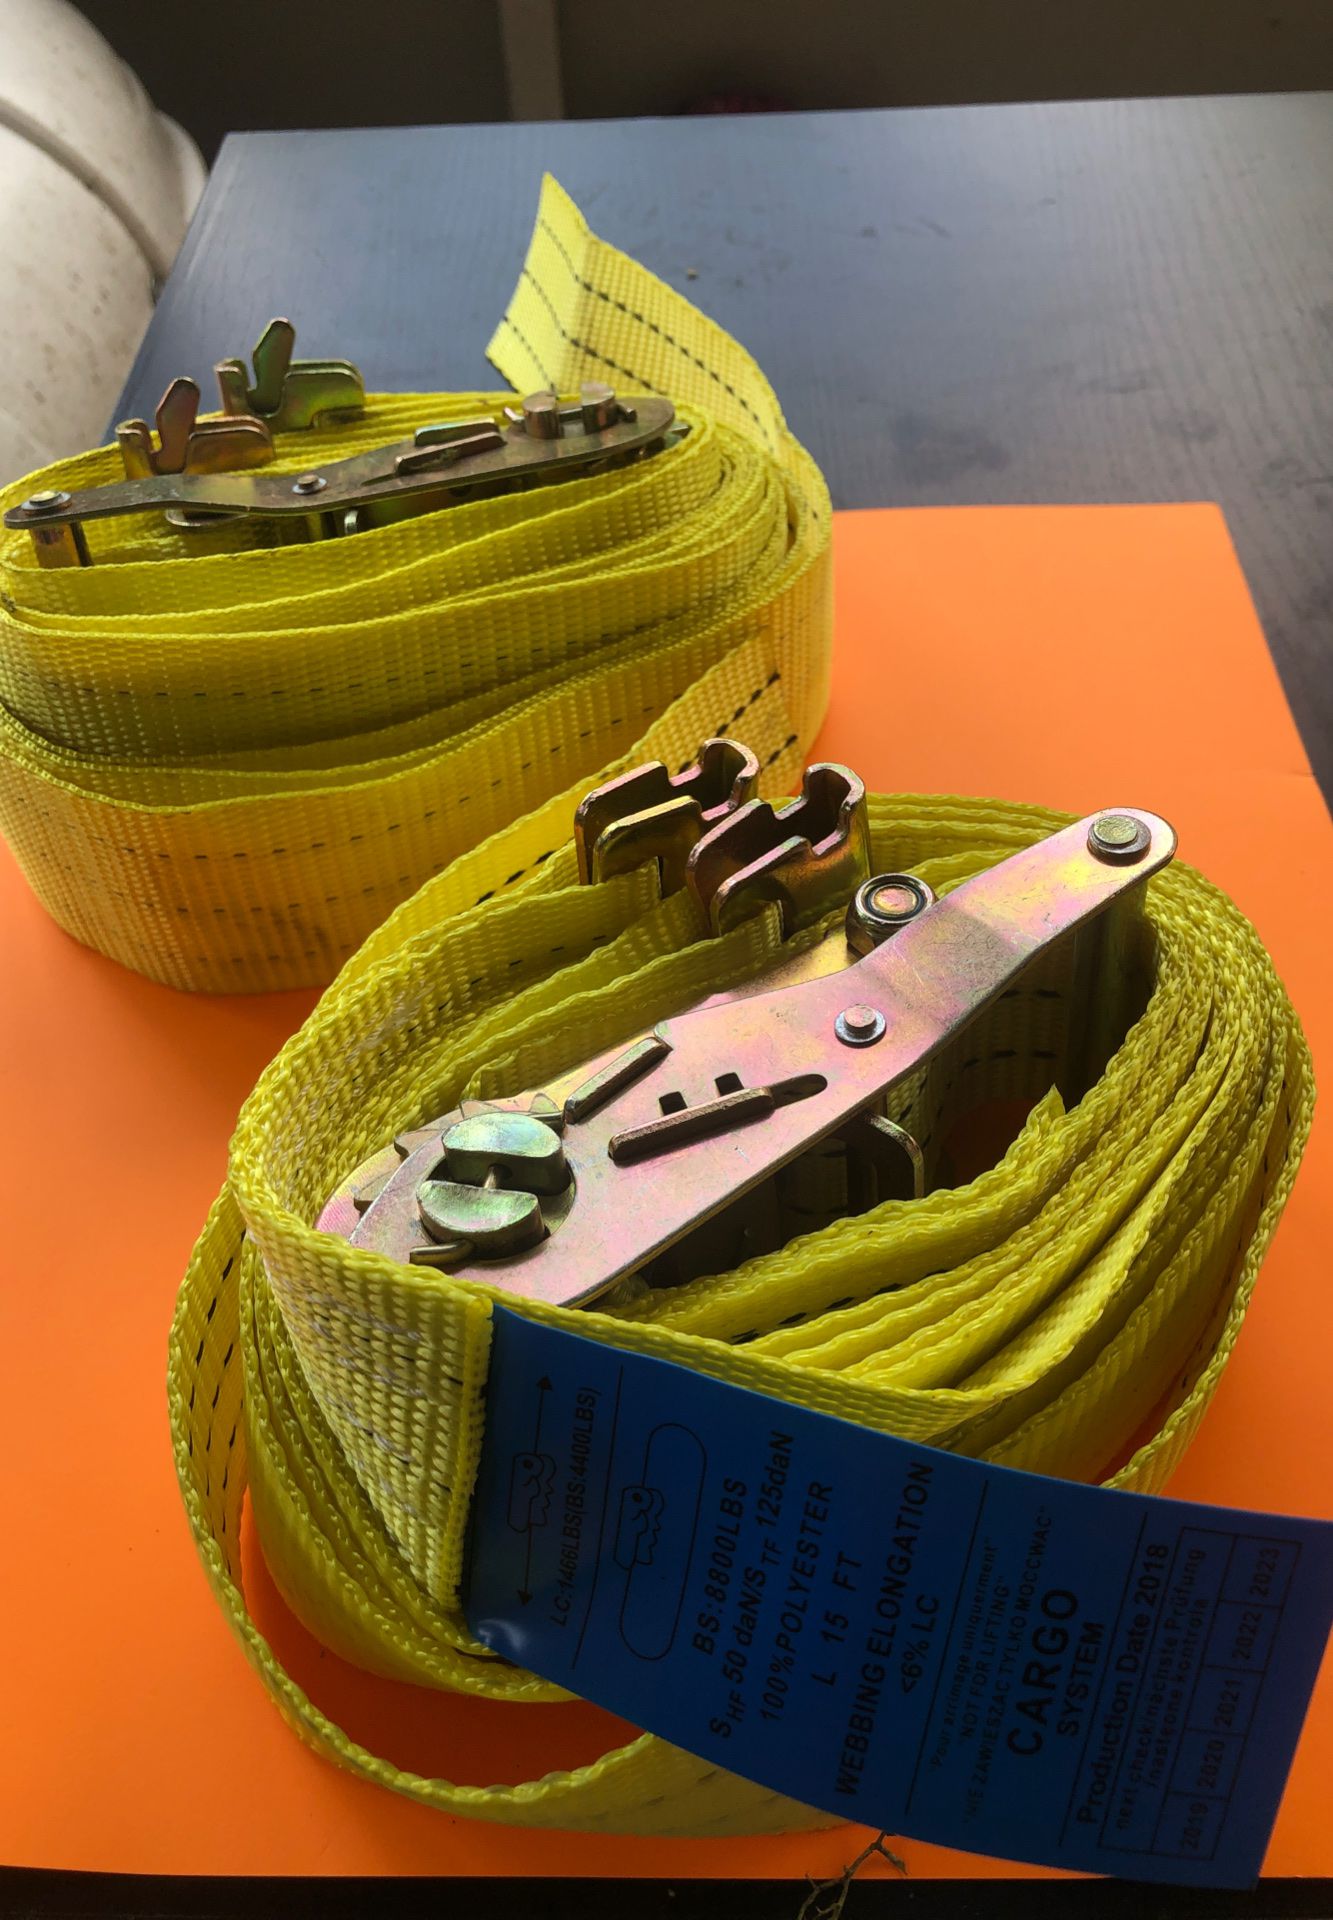 Straps used with fedex